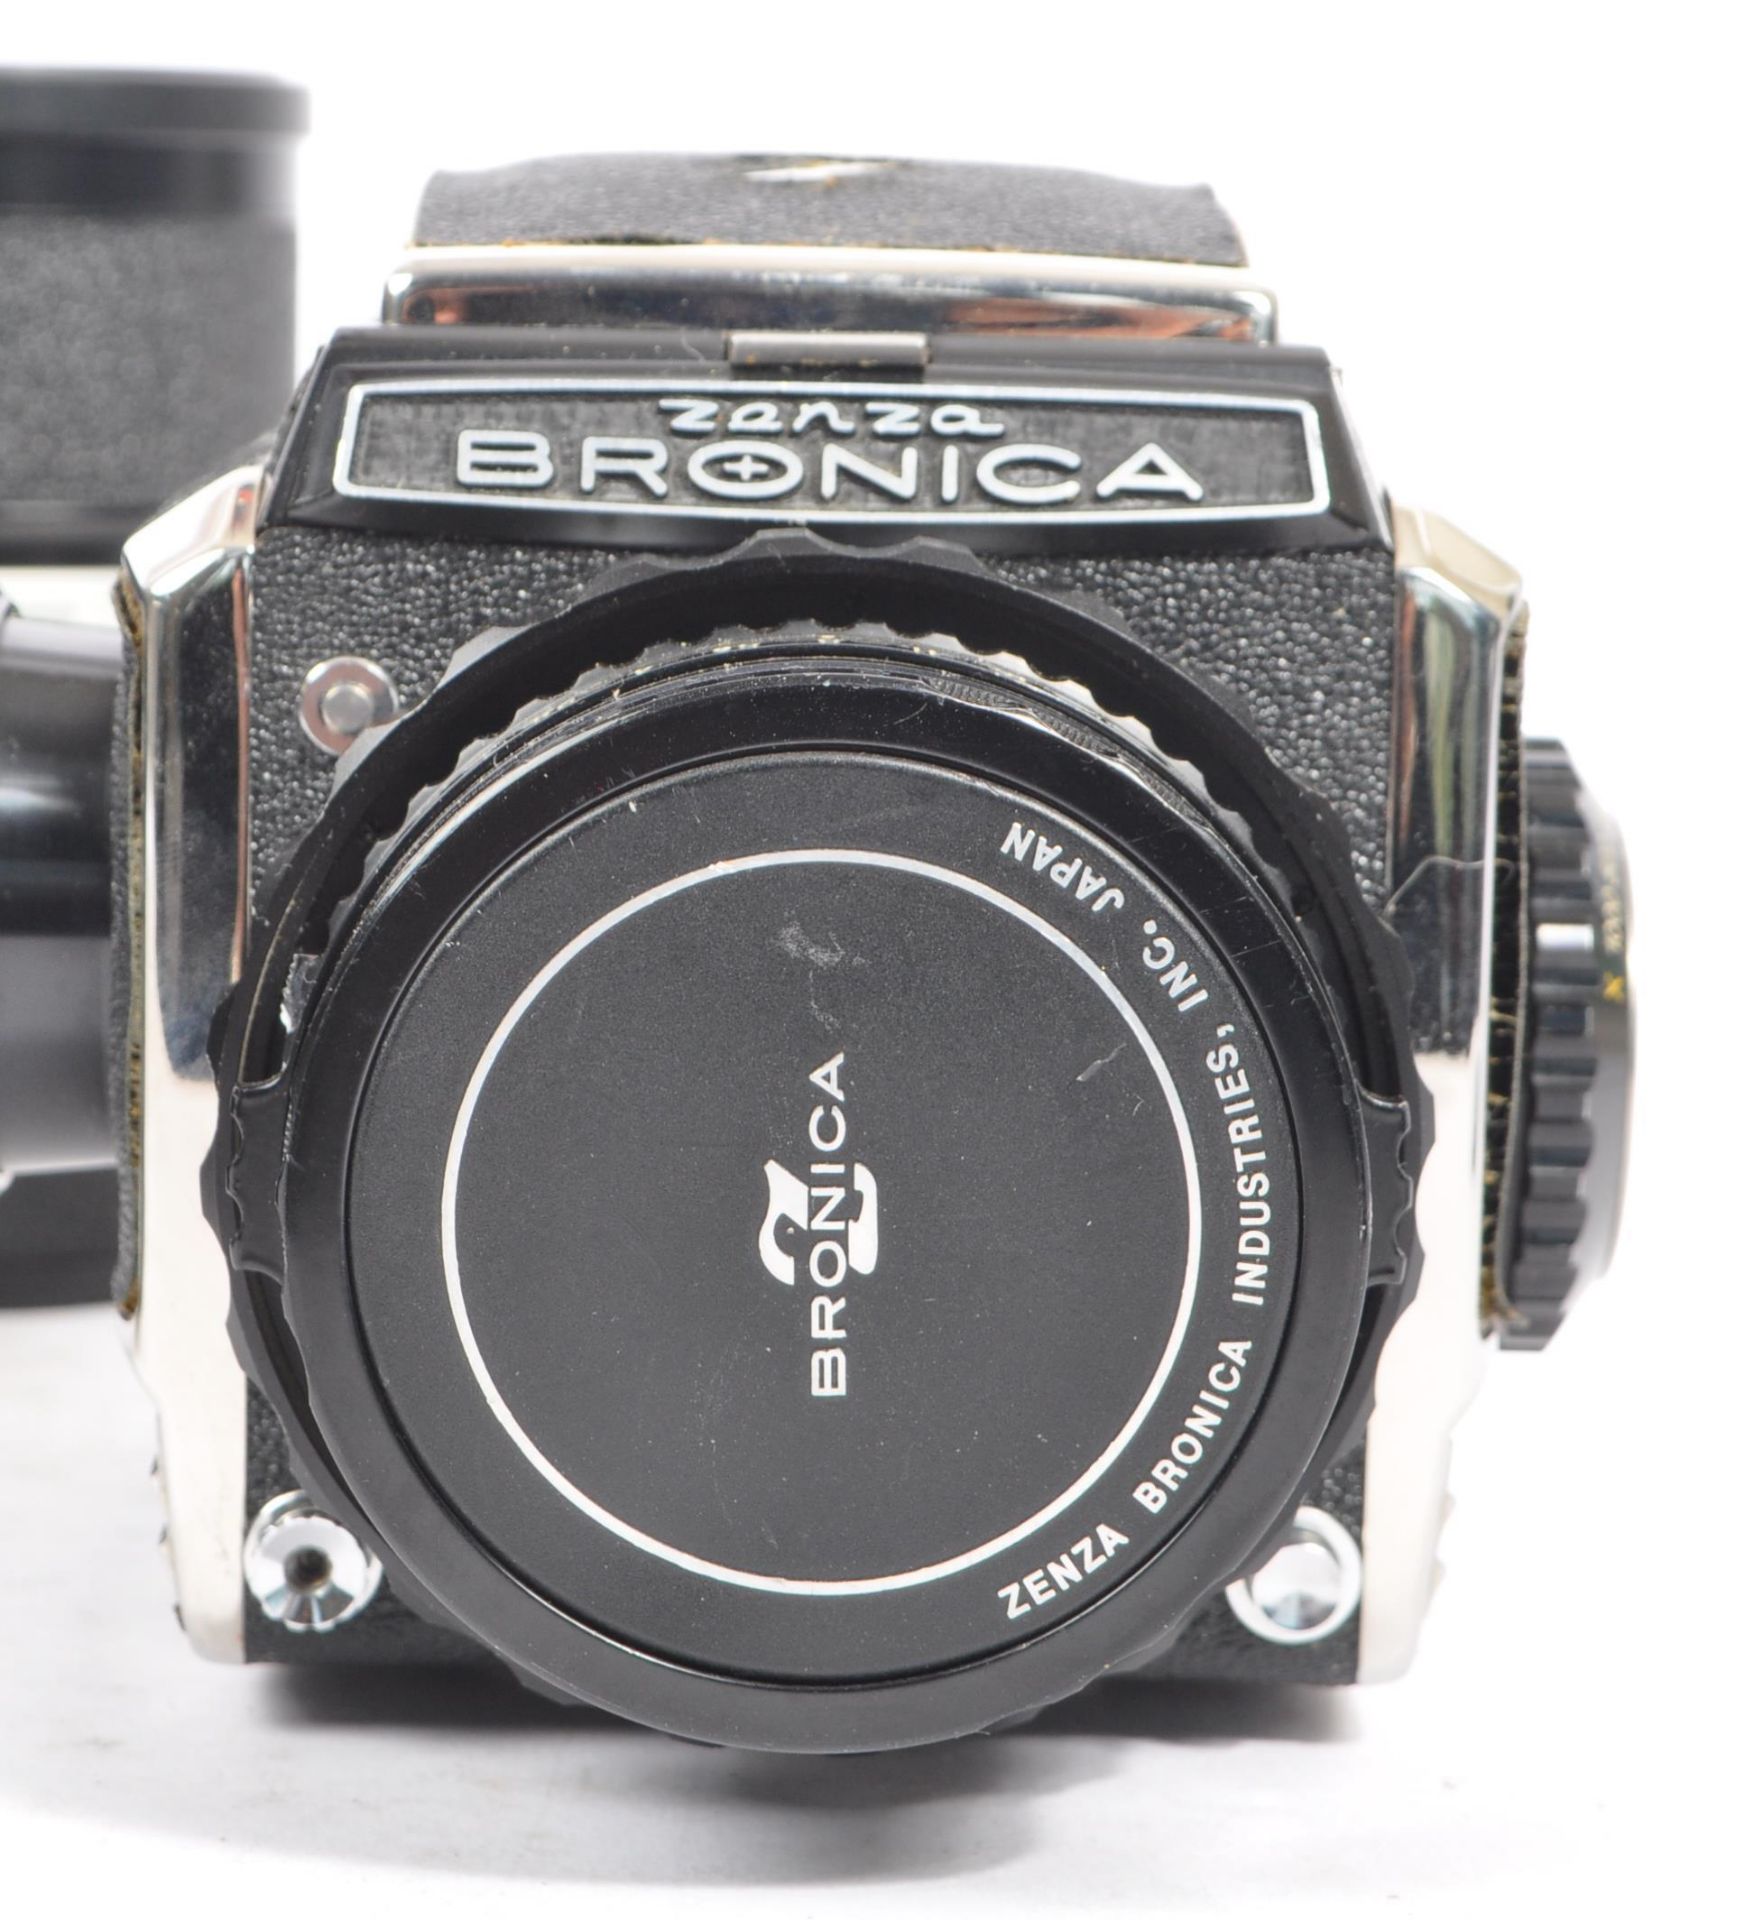 BRONICA - 197OS BRONICA S2A SLR CAMERA AND LENSES - Image 3 of 7